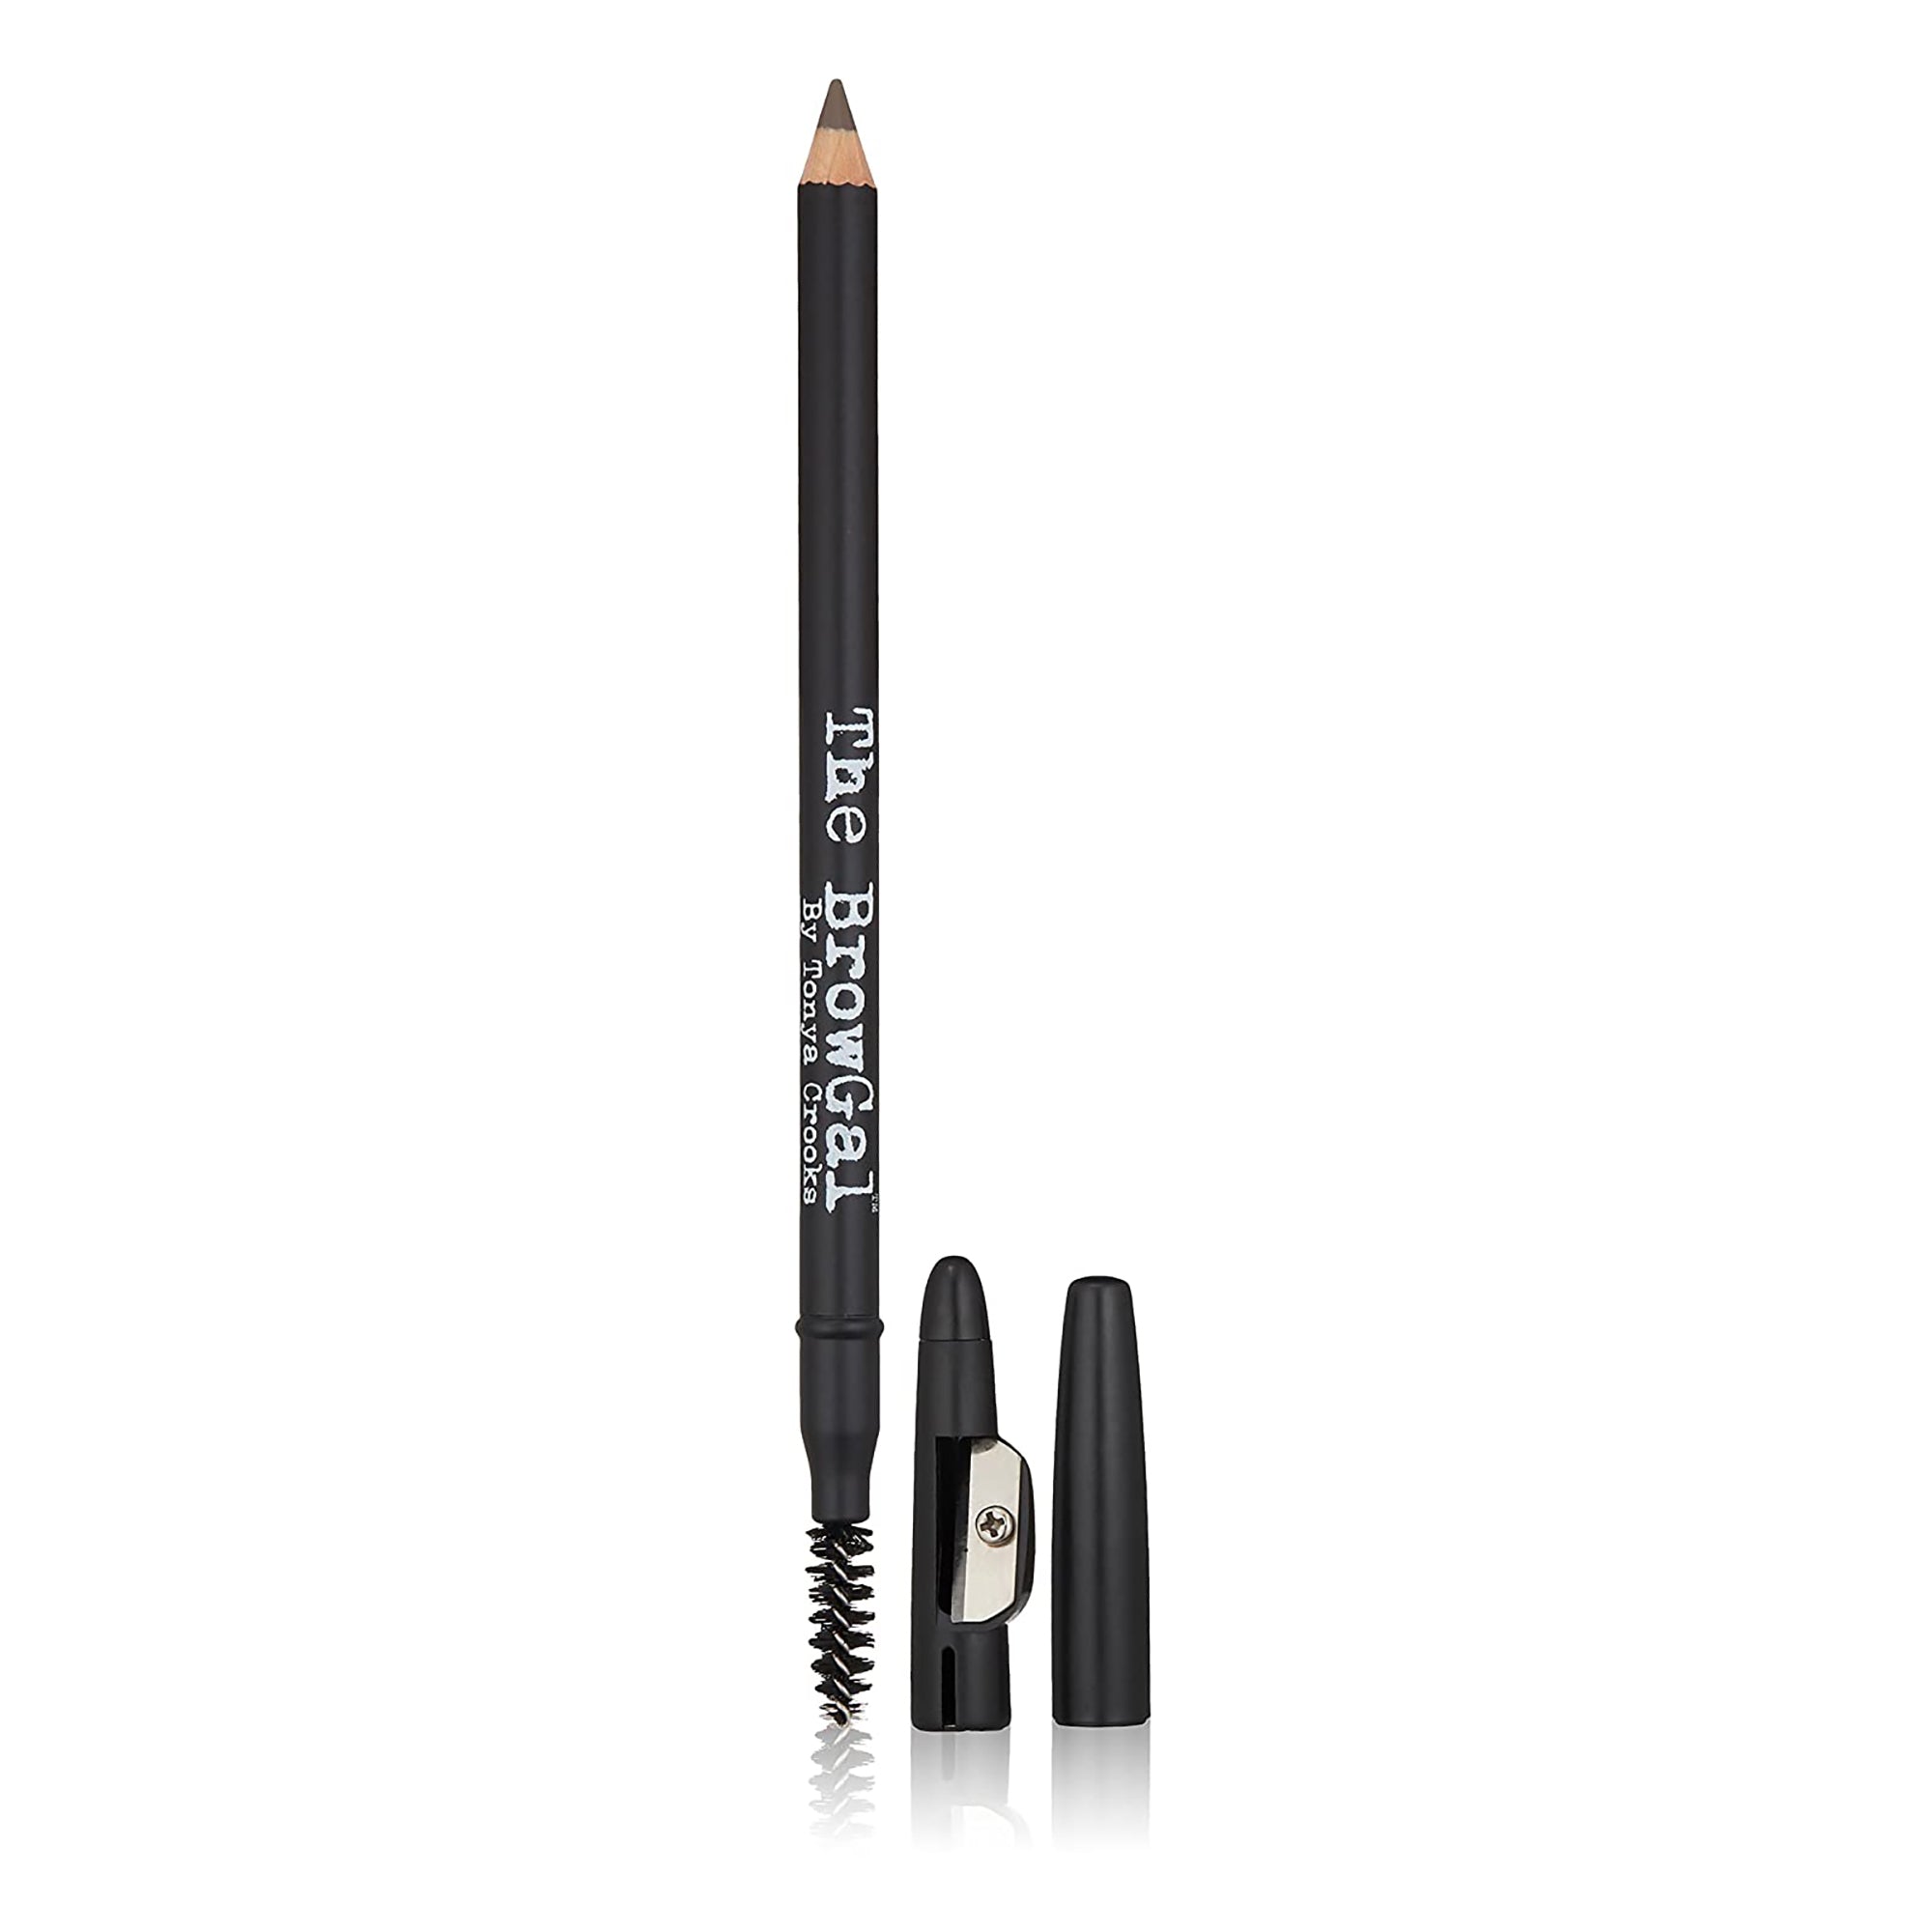 The BrowGal Skinny Eyebrow Pencil Taupe